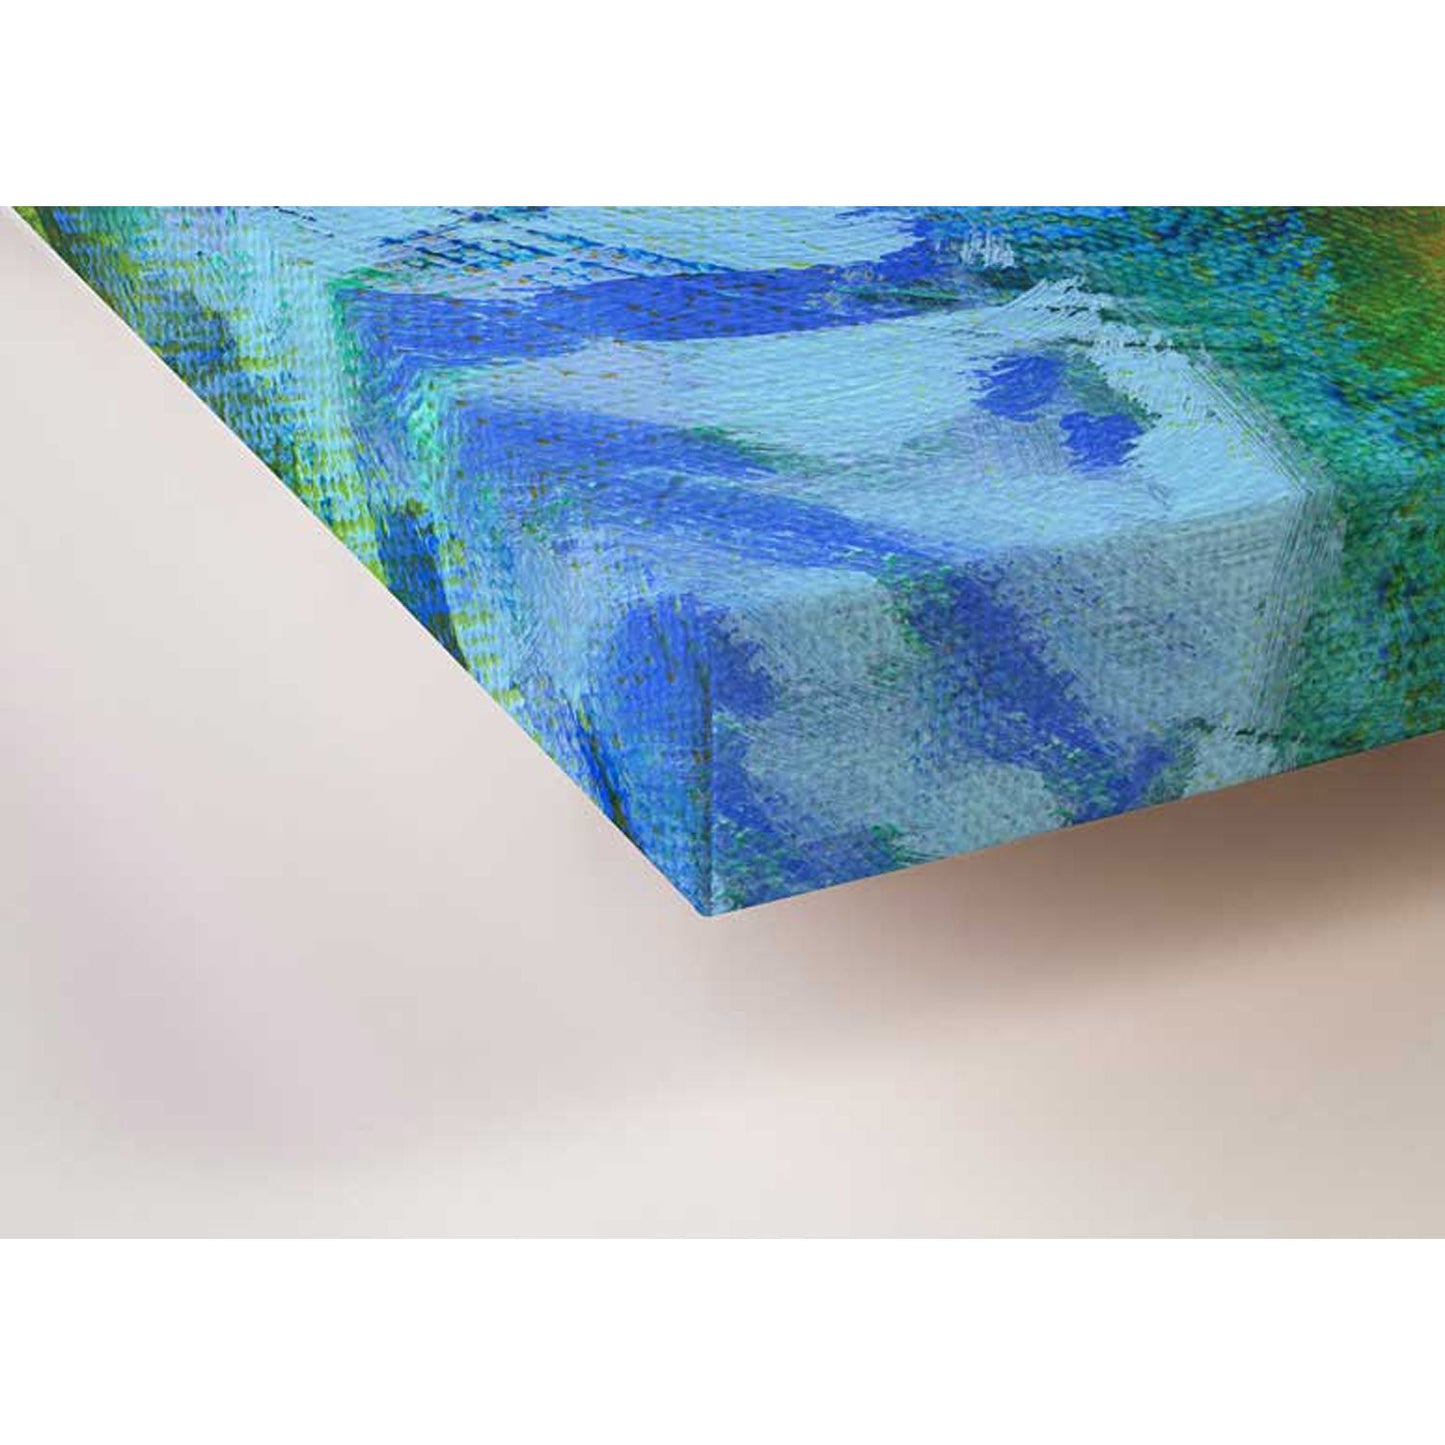 Water Series - Motion And Mystery Canvas Wall Art